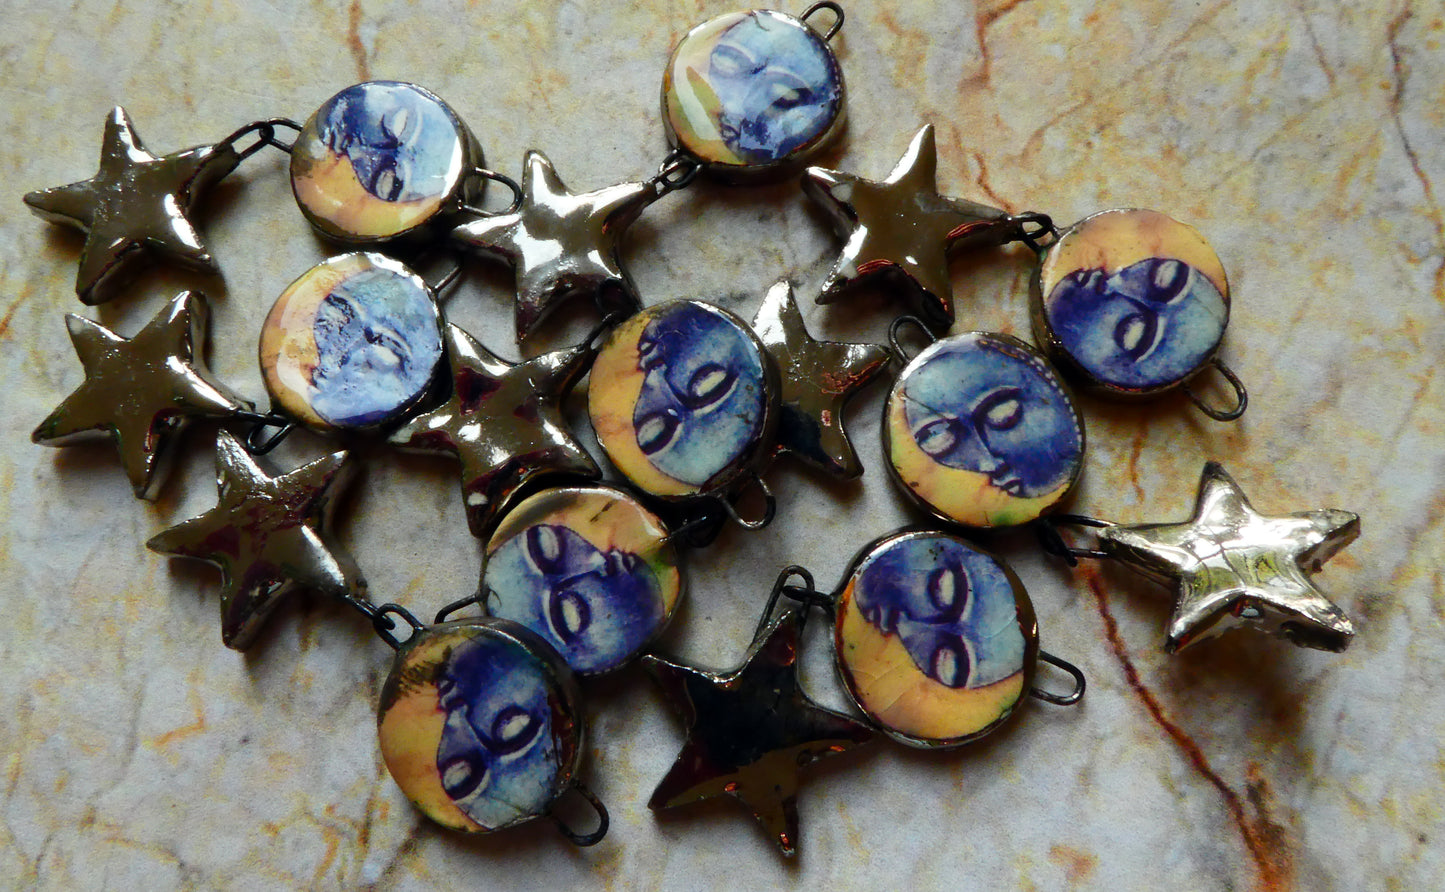 Ceramic Vintage Moon and Sun Decal and Star Earring Dangles #2